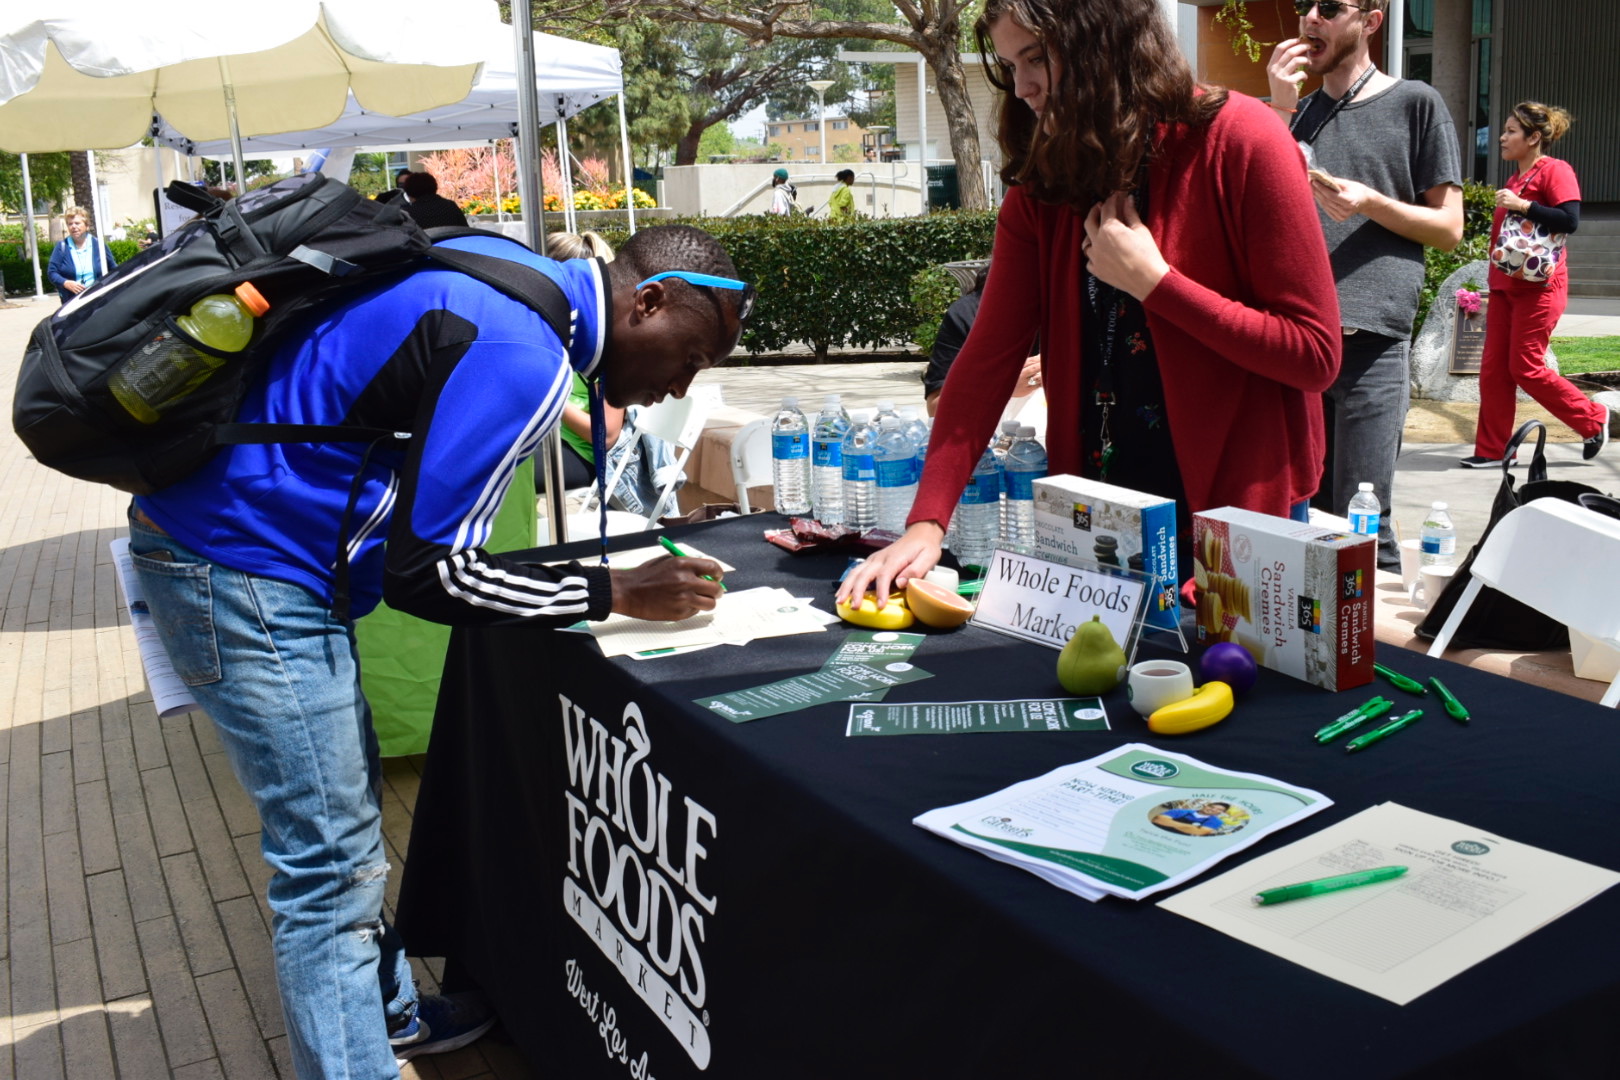  A Santa Monica College student signing up to get more information on job opportunities at Whole Foods during the Job Fair at Santa Monica College on May 8, 2018 in Santa Monica, Calif. (Claudia Vardoni/ Corsair Photo) 